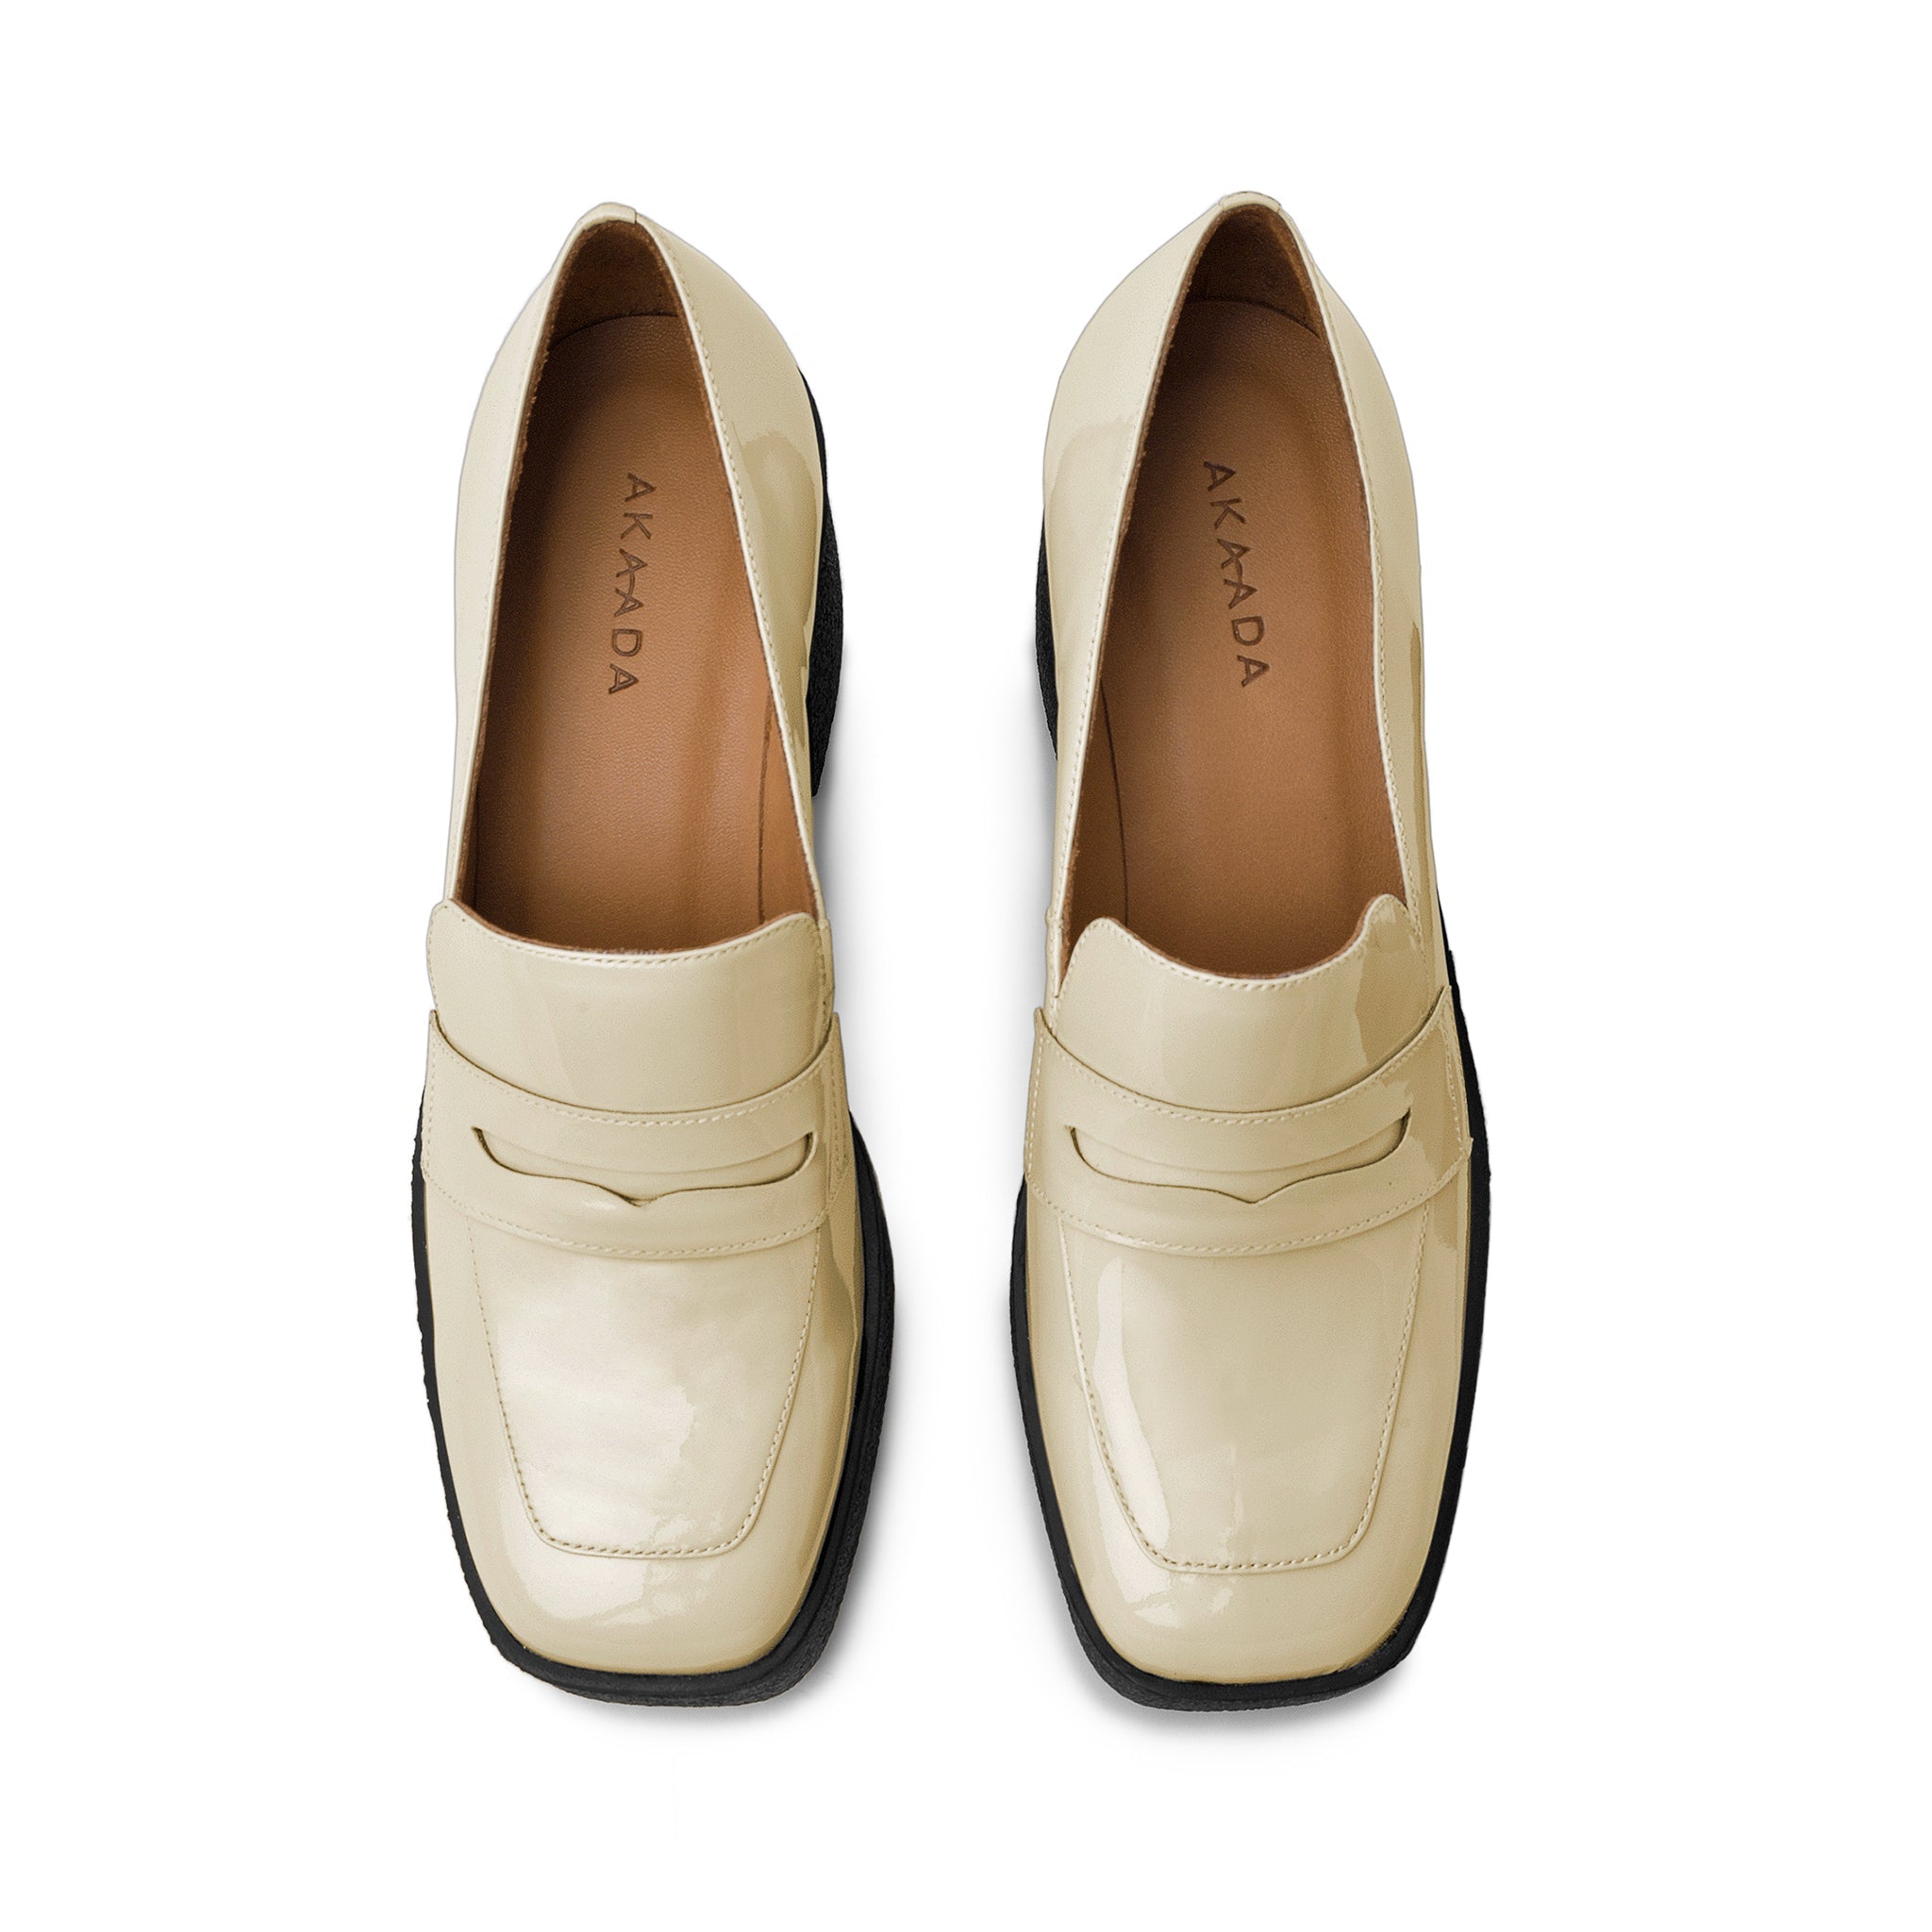 Yoko Cream Patent Leather Chunky Loafers 21031-01-03 -7